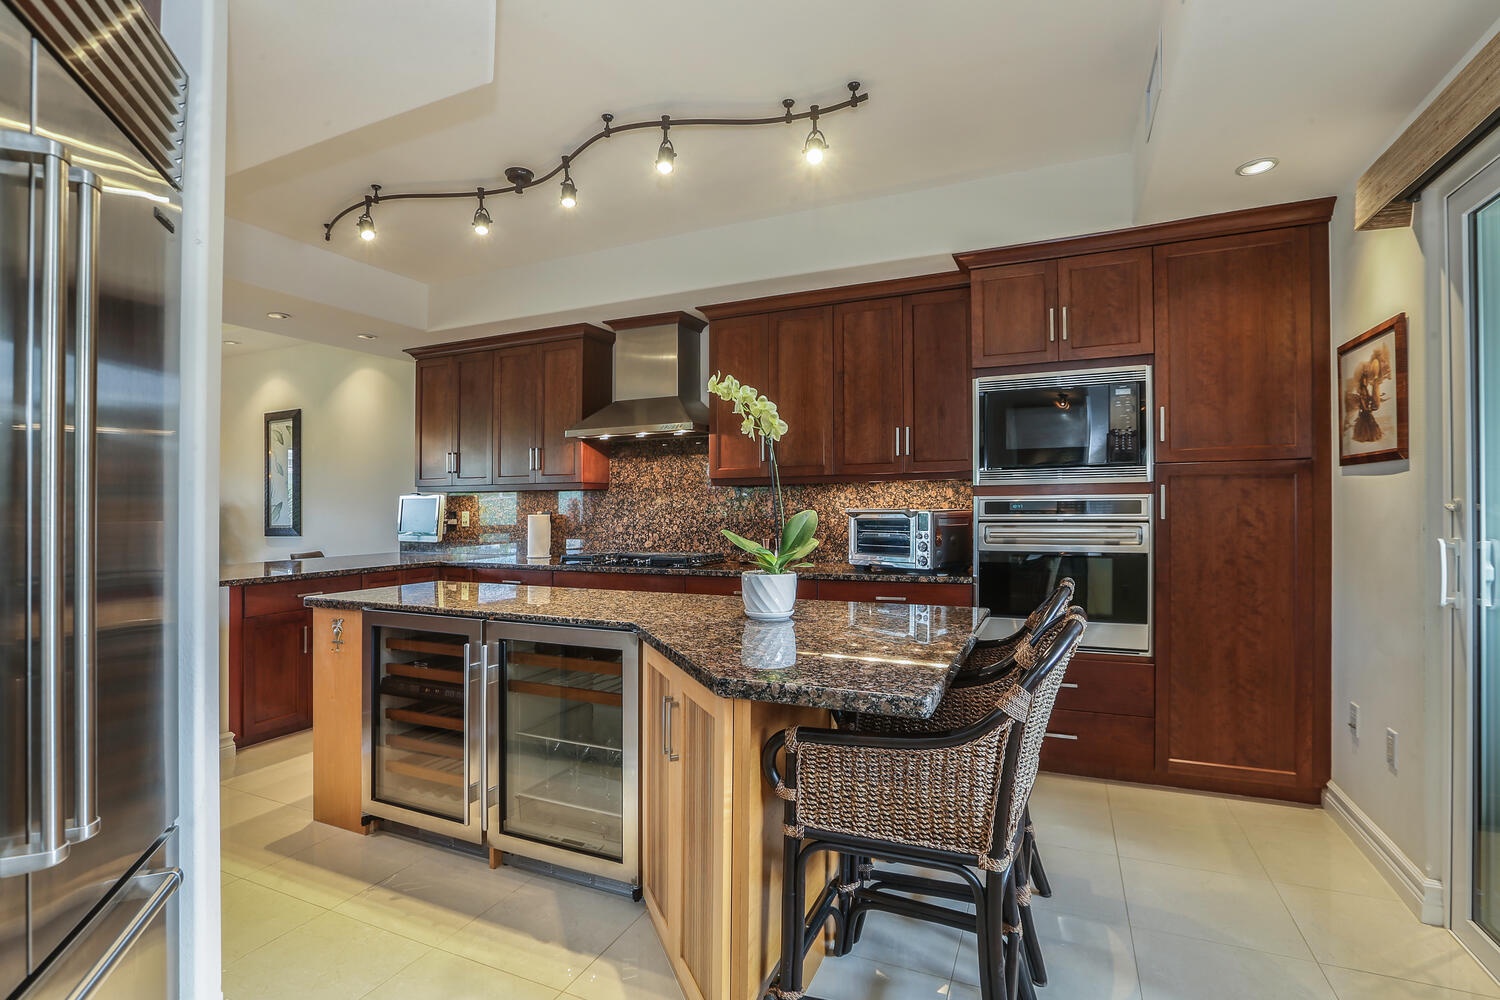 Princeville Vacation Rentals, Hale Moana - granite countertops and stainless steel appliances, including a Jenn Air gas range and sub zero fridge.